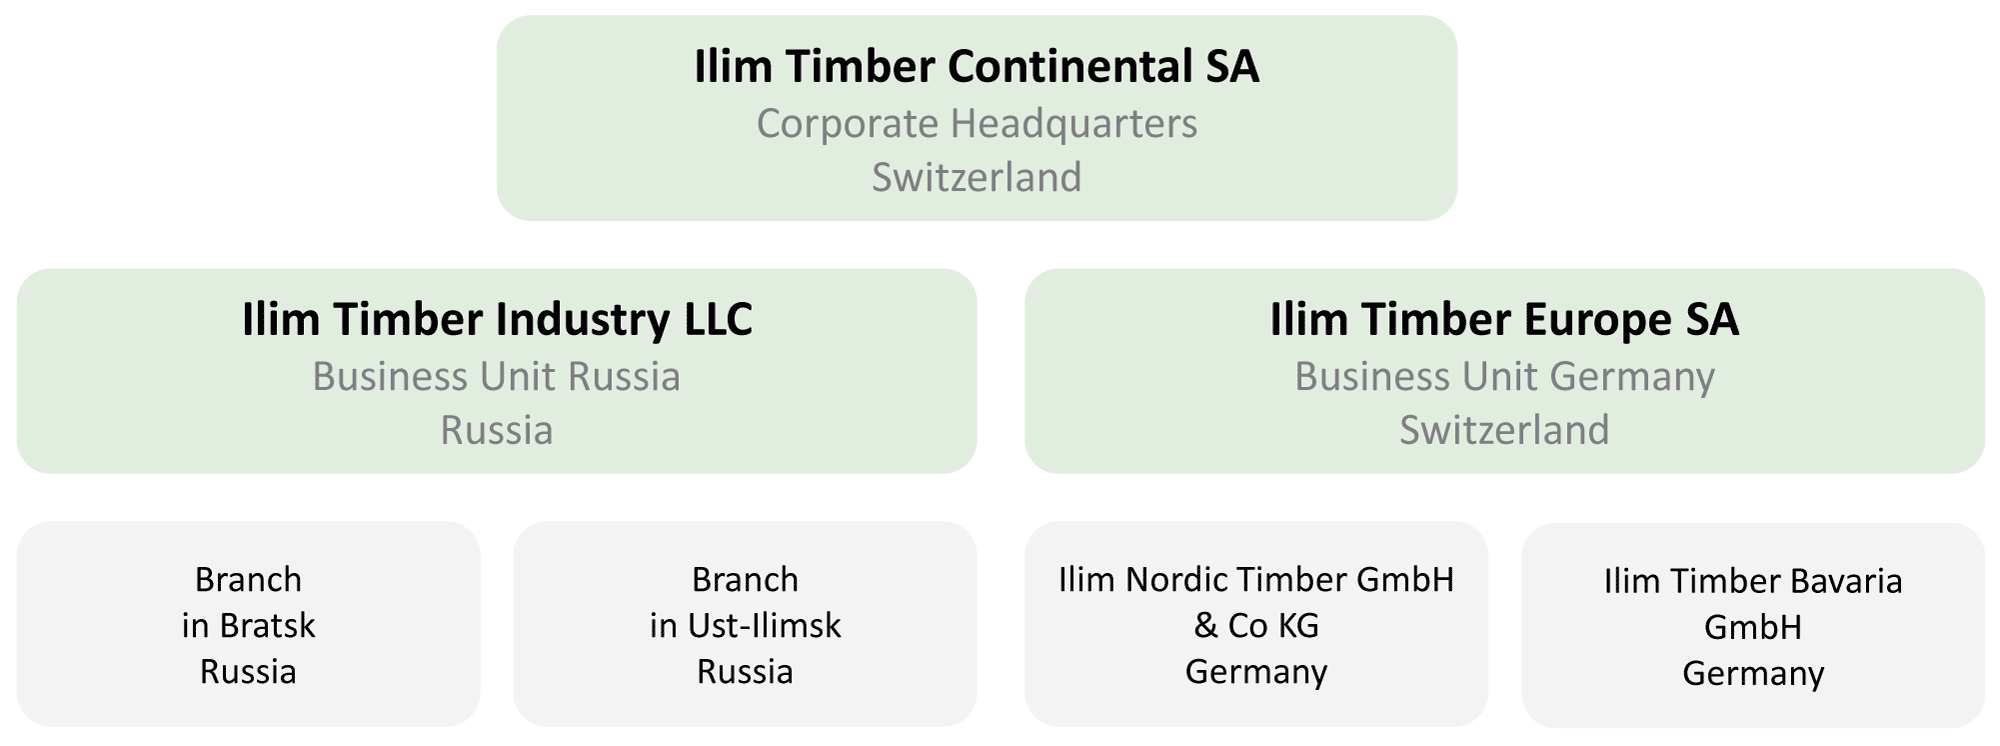 Organisational structure Ilim Timber